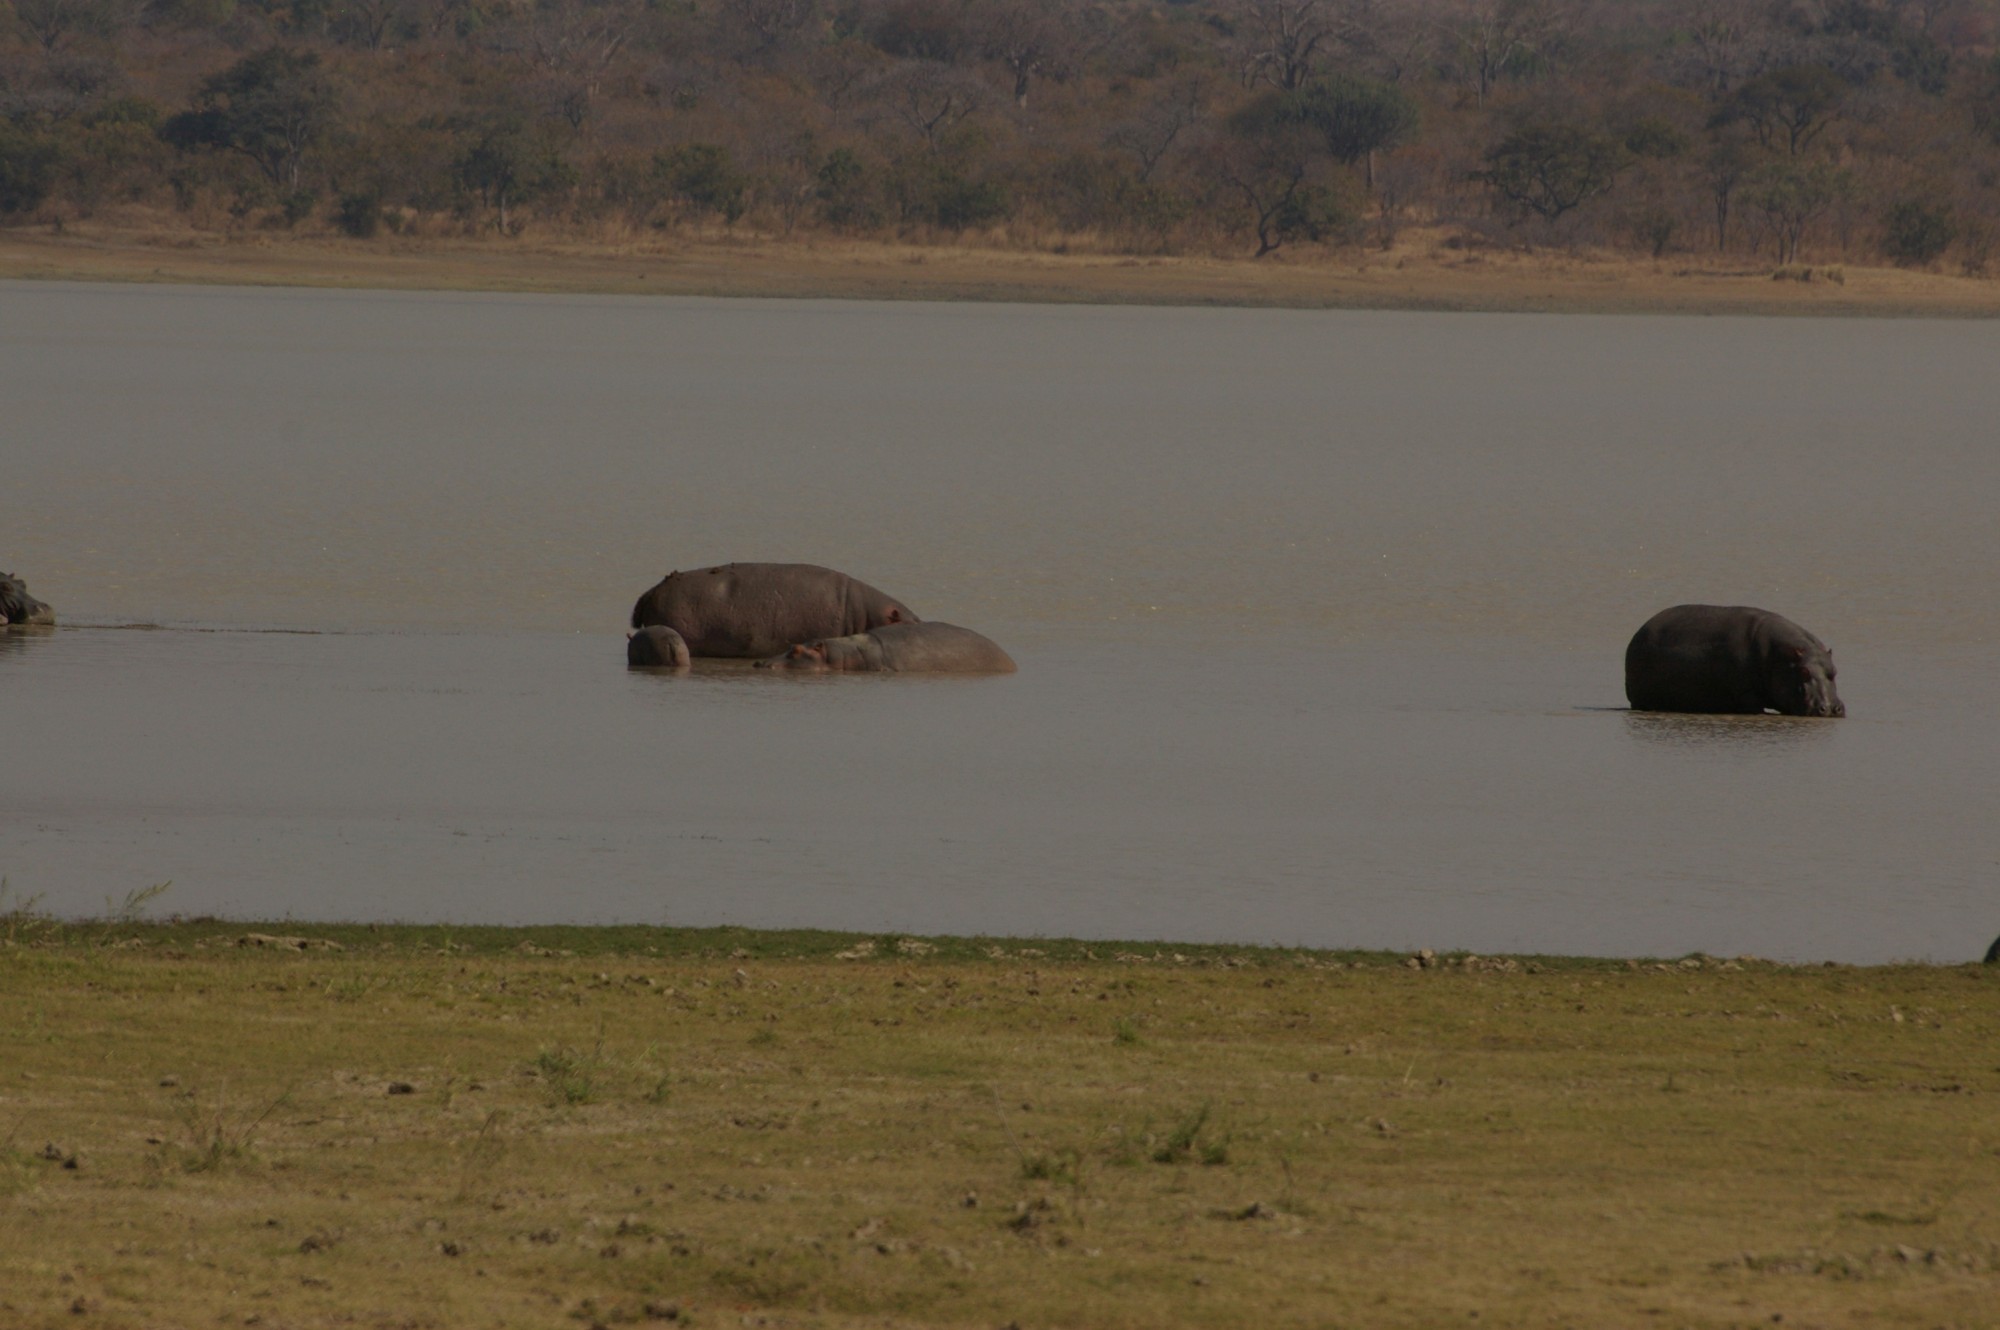 Several hippos standing in shallow water.